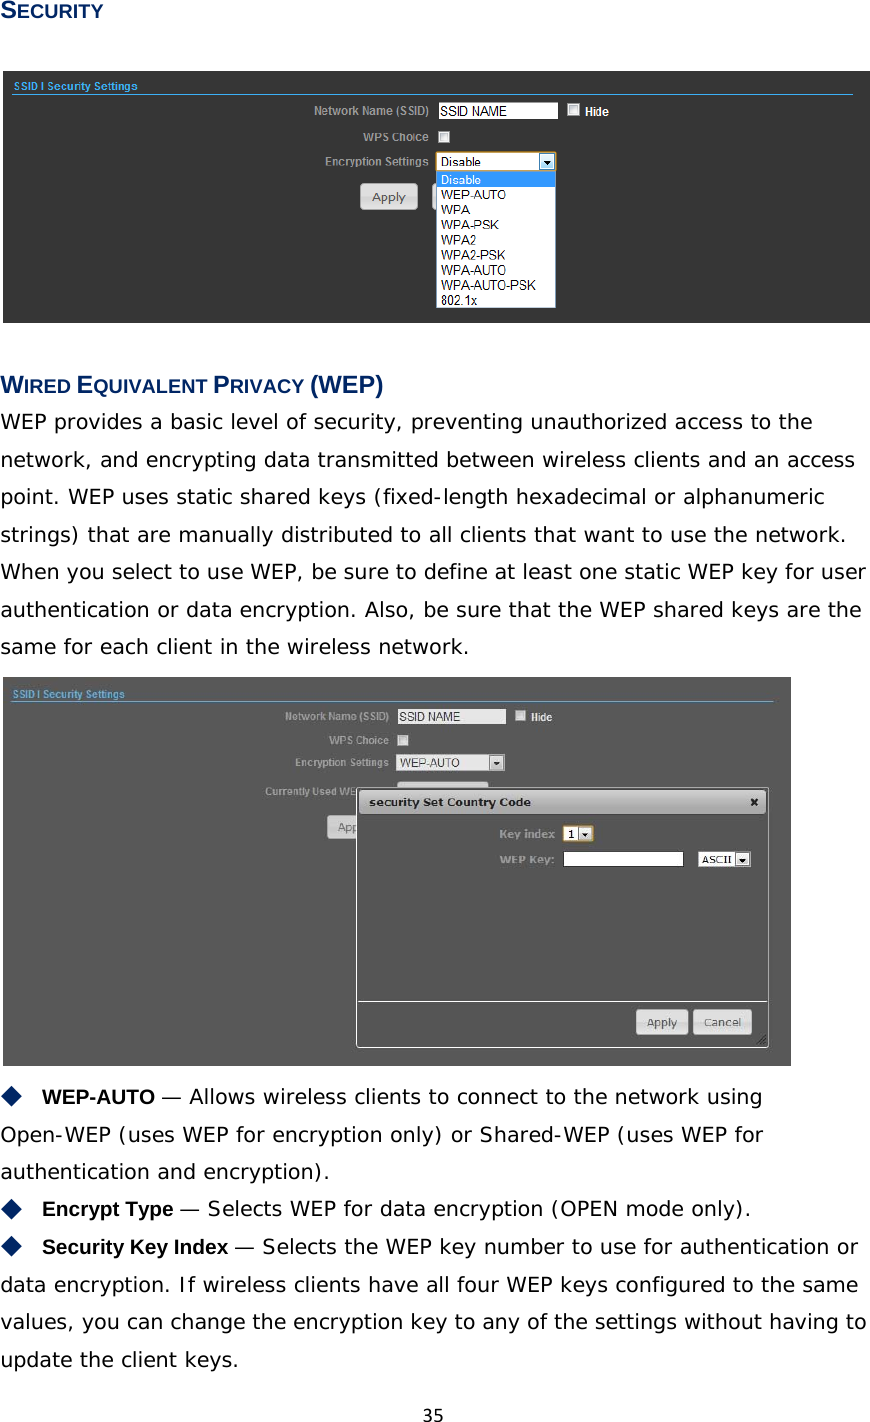 35SECURITY   WIRED EQUIVALENT PRIVACY (WEP) WEP provides a basic level of security, preventing unauthorized access to the network, and encrypting data transmitted between wireless clients and an access point. WEP uses static shared keys (fixed-length hexadecimal or alphanumeric strings) that are manually distributed to all clients that want to use the network. When you select to use WEP, be sure to define at least one static WEP key for user authentication or data encryption. Also, be sure that the WEP shared keys are the same for each client in the wireless network.  ◆　WEP-AUTO — Allows wireless clients to connect to the network using Open-WEP (uses WEP for encryption only) or Shared-WEP (uses WEP for authentication and encryption). ◆　Encrypt Type — Selects WEP for data encryption (OPEN mode only). ◆　Security Key Index — Selects the WEP key number to use for authentication or data encryption. If wireless clients have all four WEP keys configured to the same values, you can change the encryption key to any of the settings without having to update the client keys. 